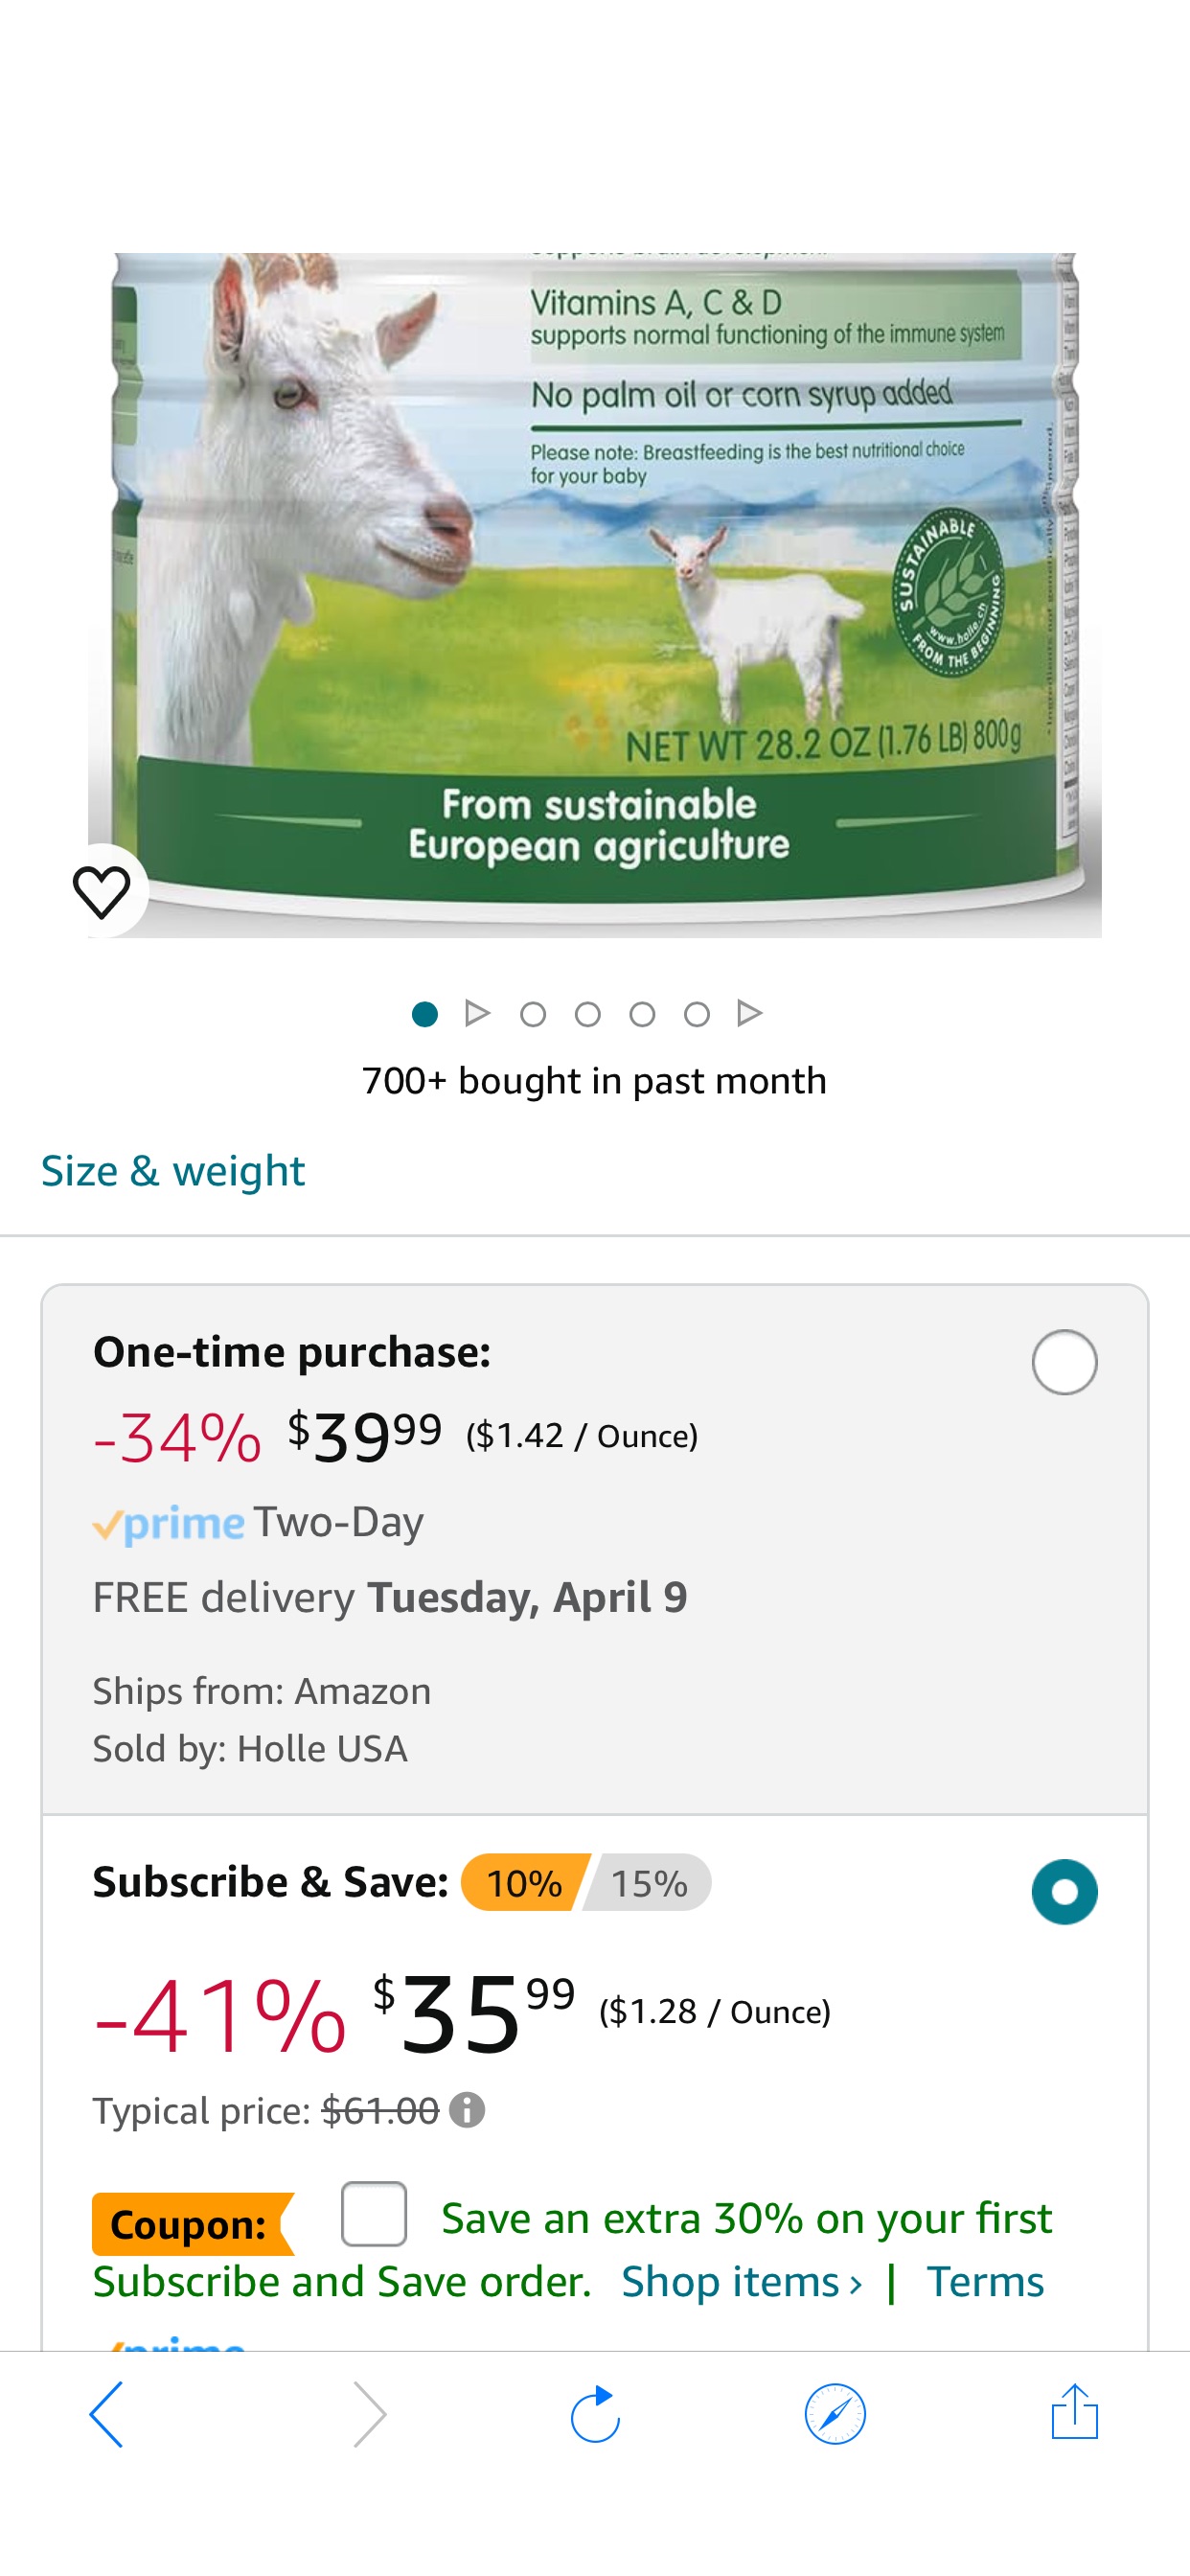 Amazon.com: Holle - Goat Milk Toddler Formula - Easy to digest - Non-GMO with DHA for Healthy Brain Development - 1 Year & Up : Baby 羊奶粉 儿童奶粉